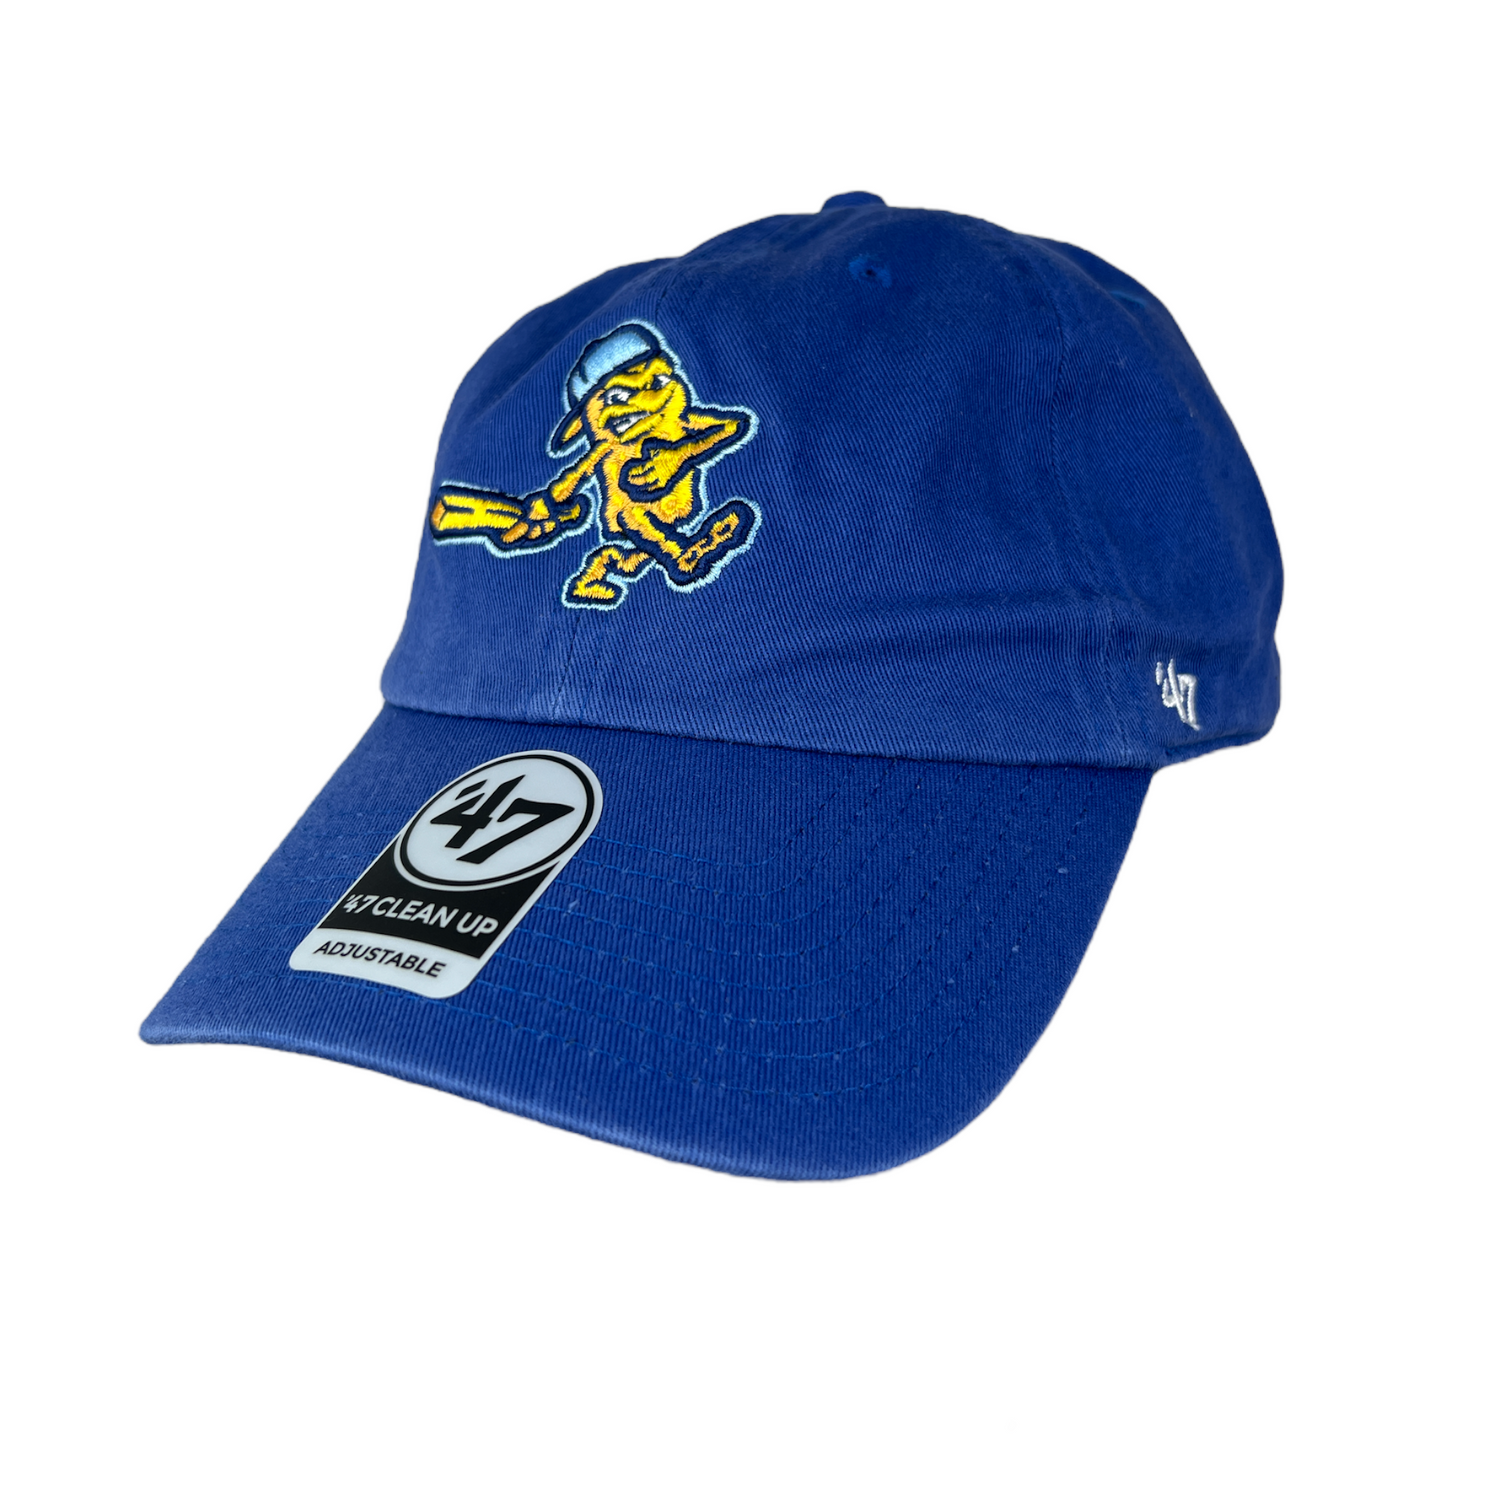 47 Brand Clean Up Adjustable Minor League Baseball Dad Hat from the DubSea Fish Sticks